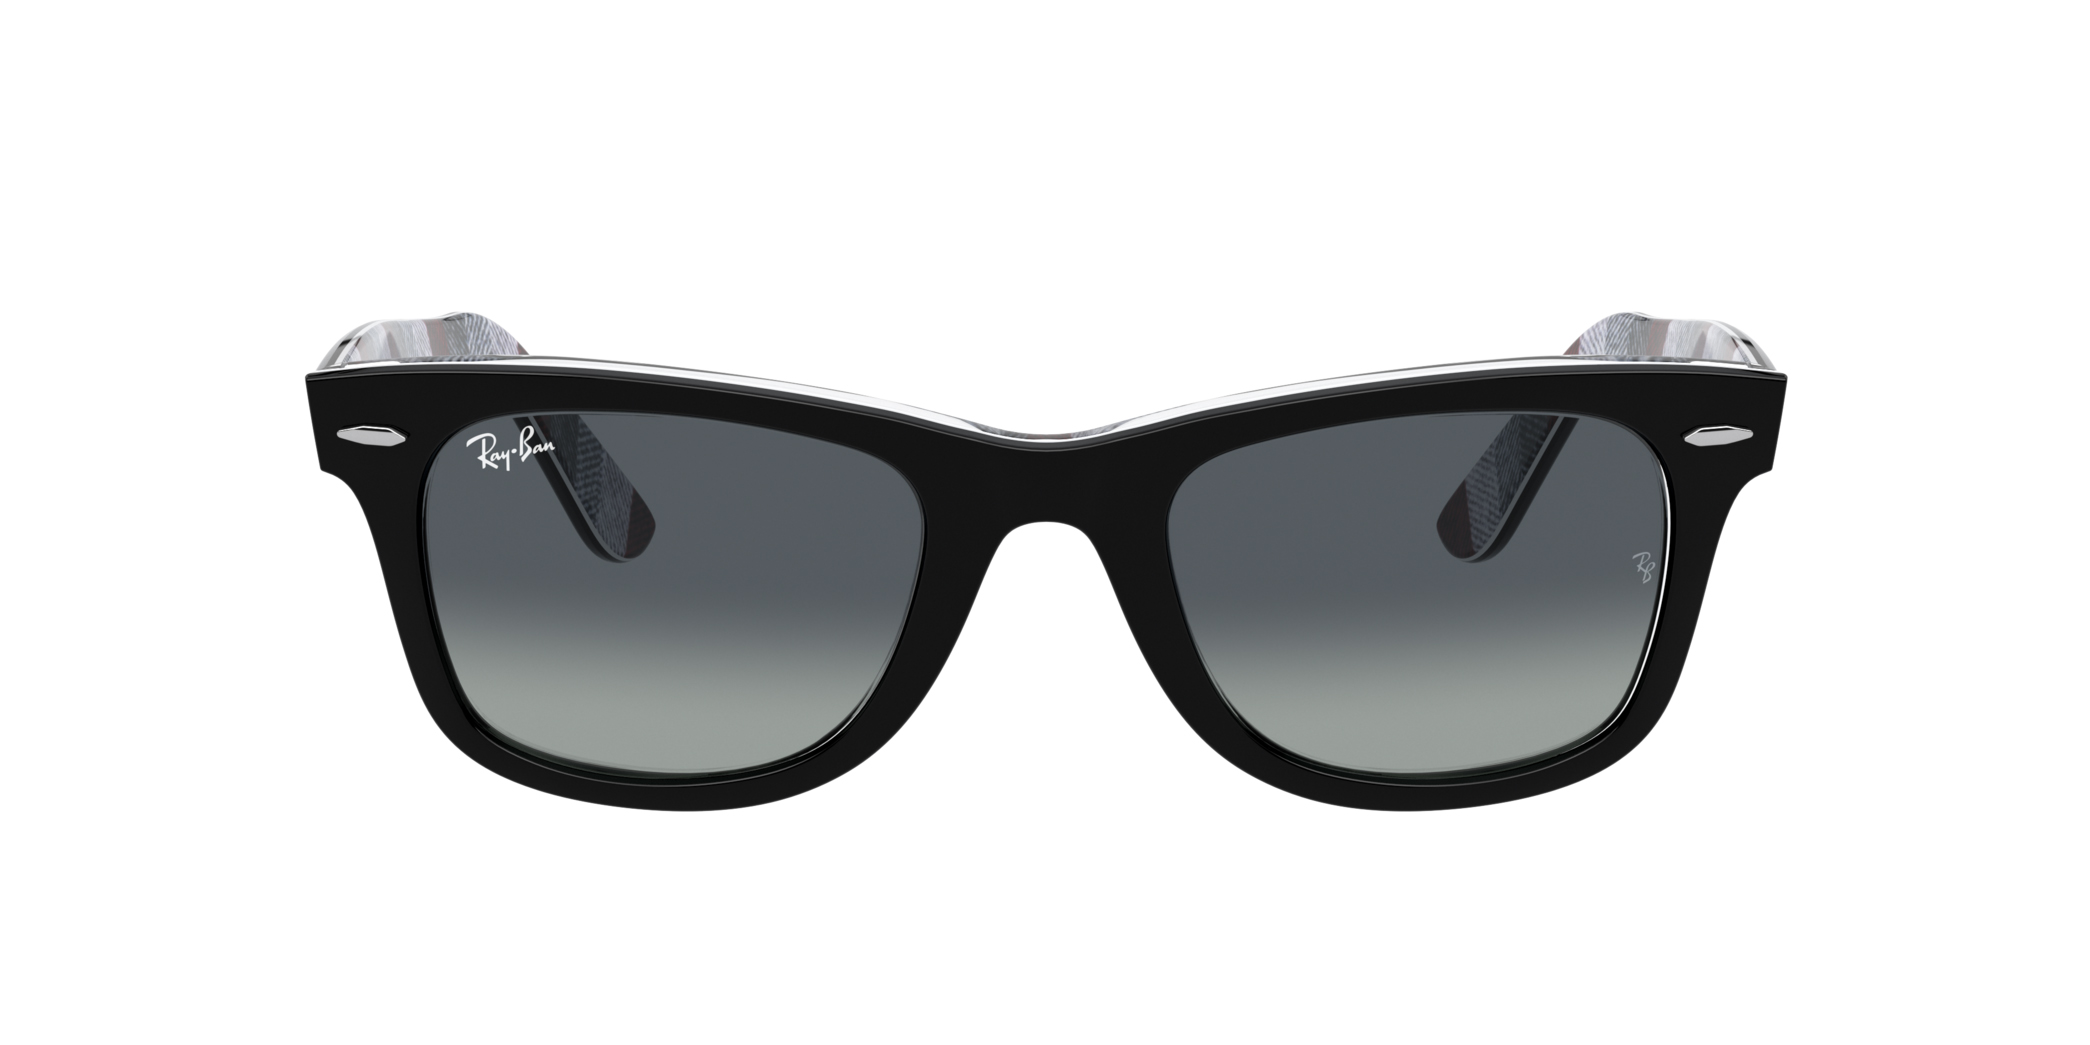 Experience more than 191 original ray ban sunglasses latest